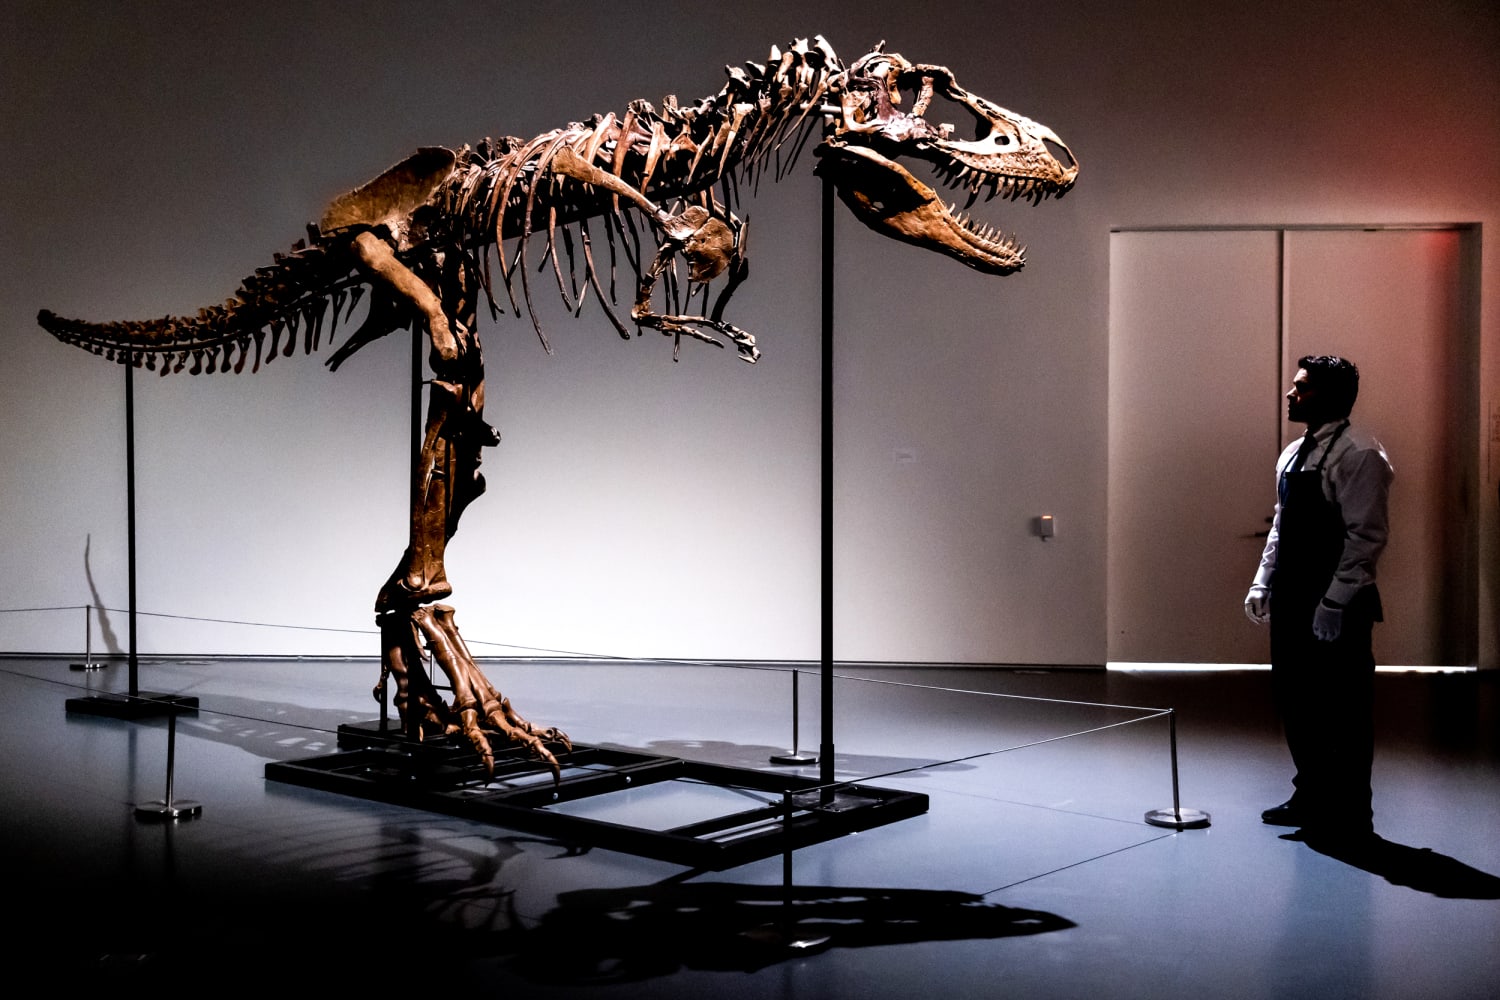 76 million-year-old dinosaur skeleton of T. rex relative to be auctioned in  New York City